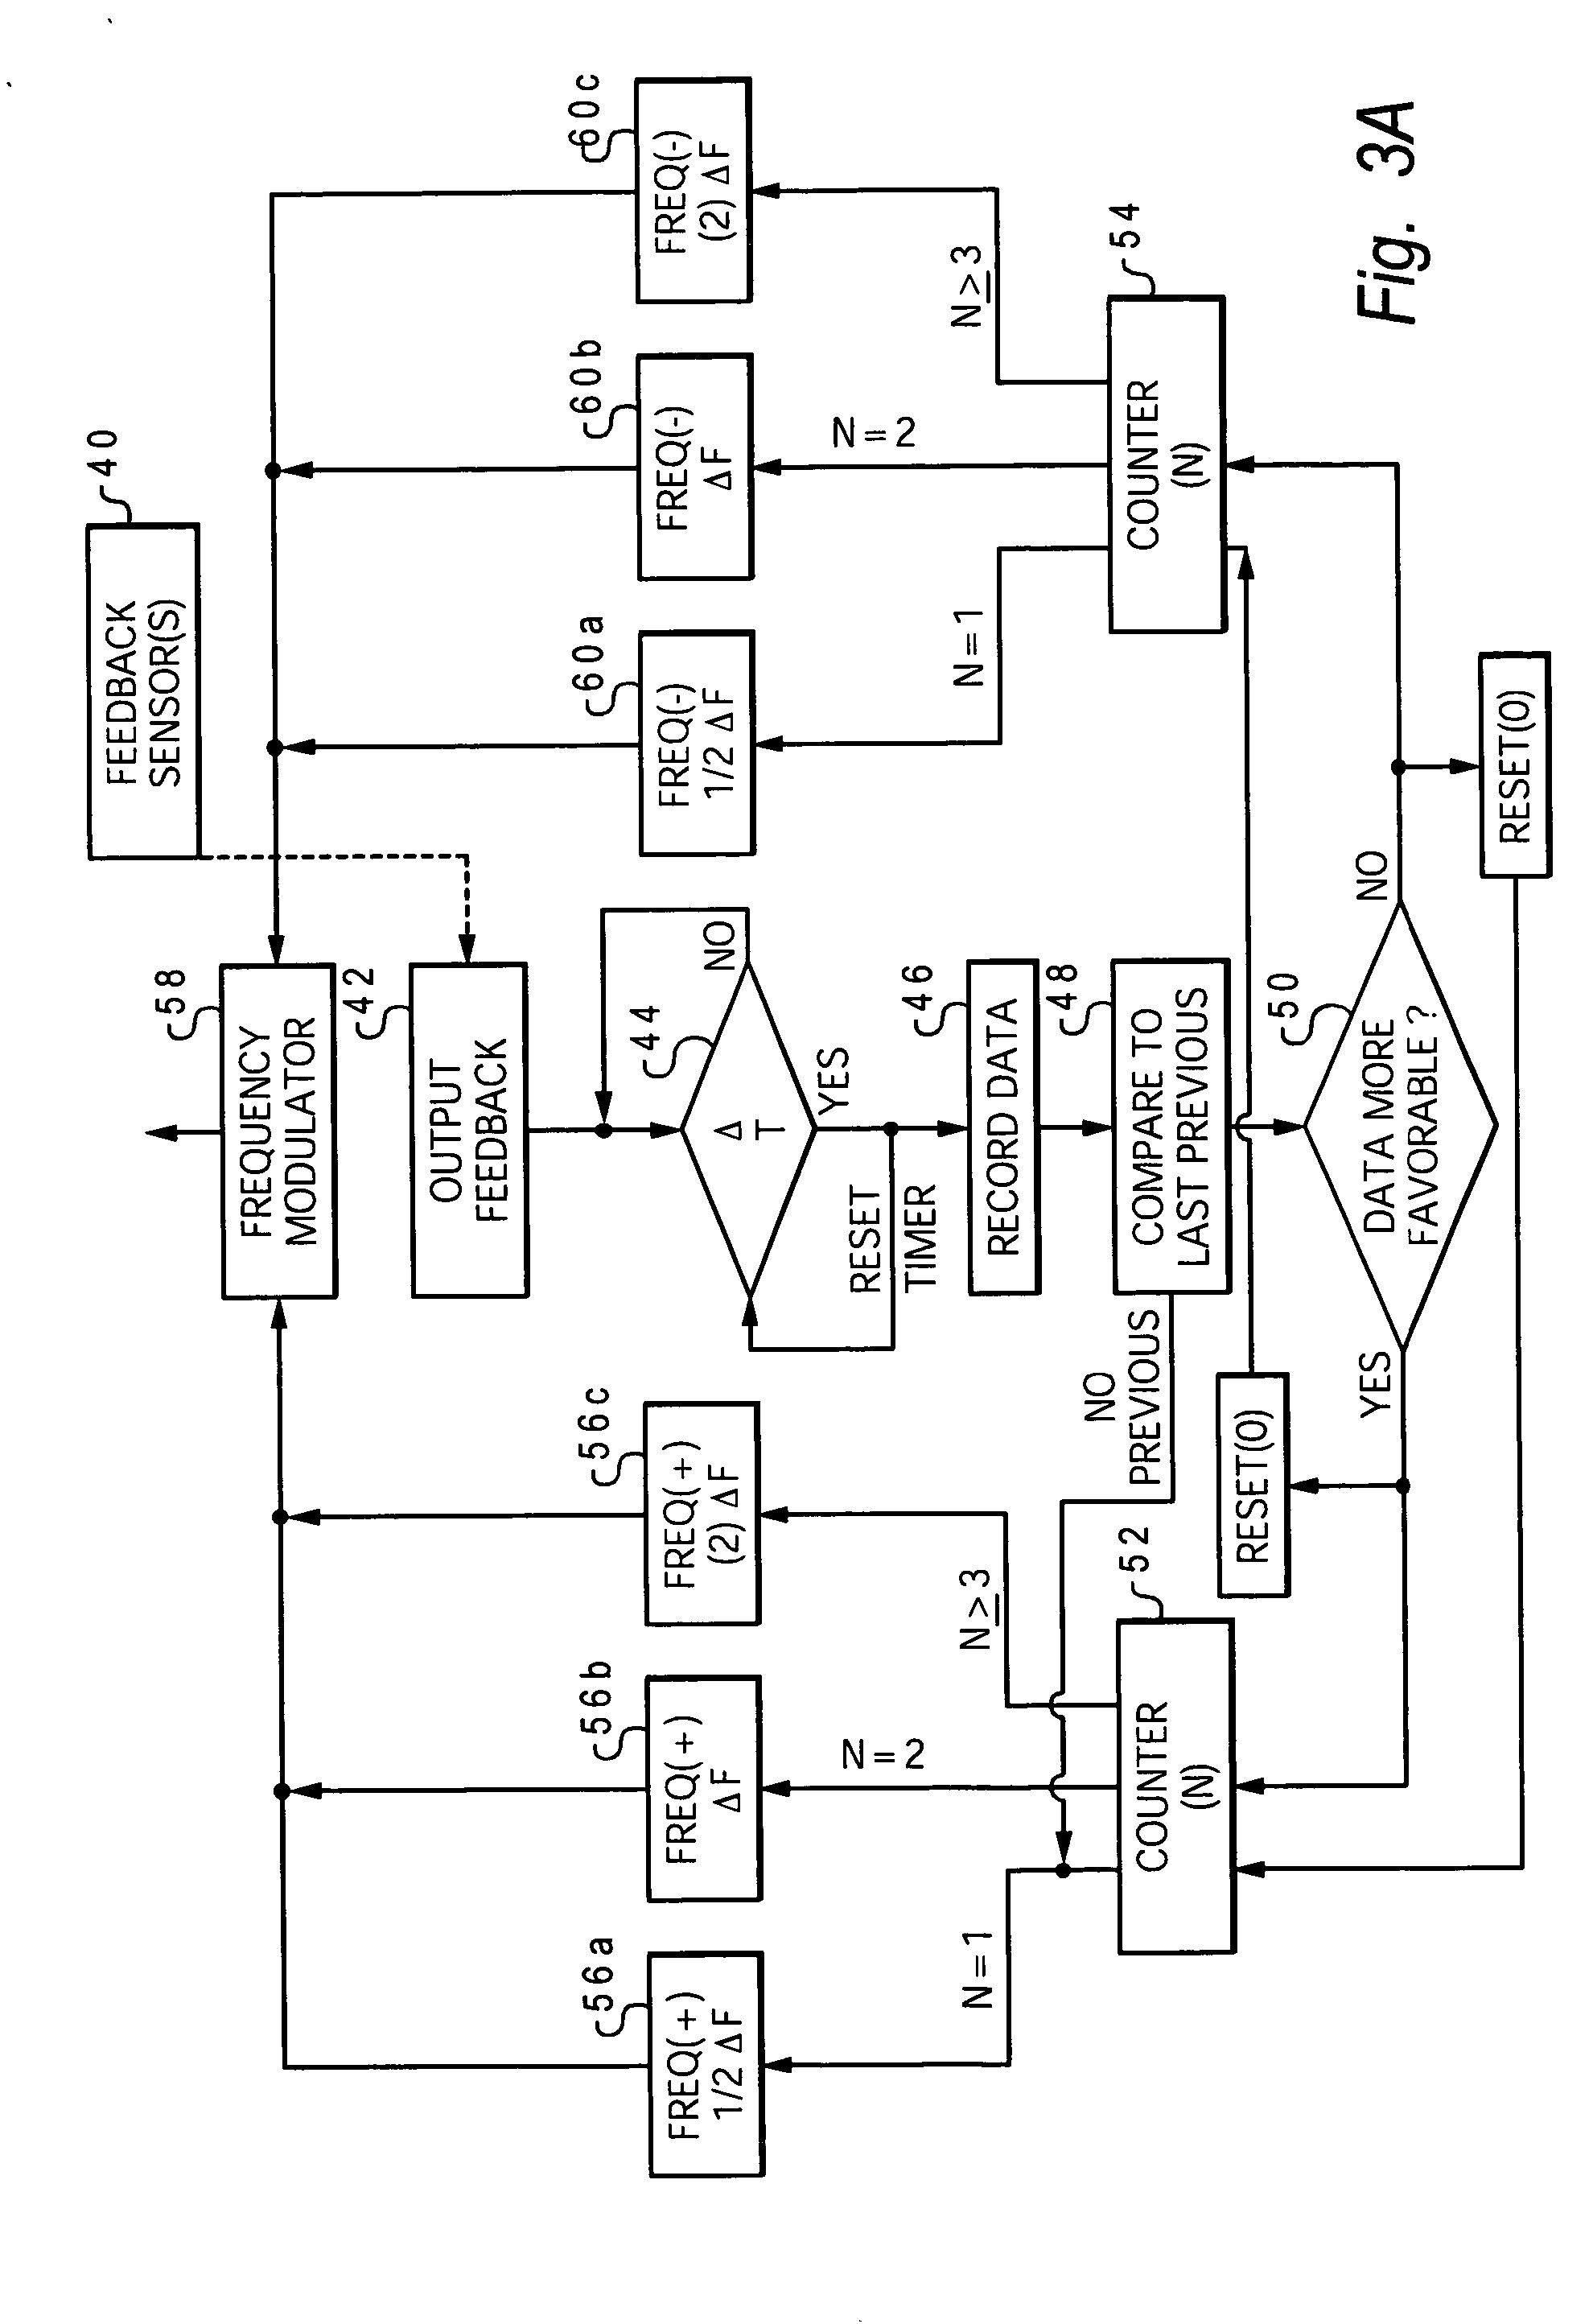 Nuclear resonance applications for enhanced combustion